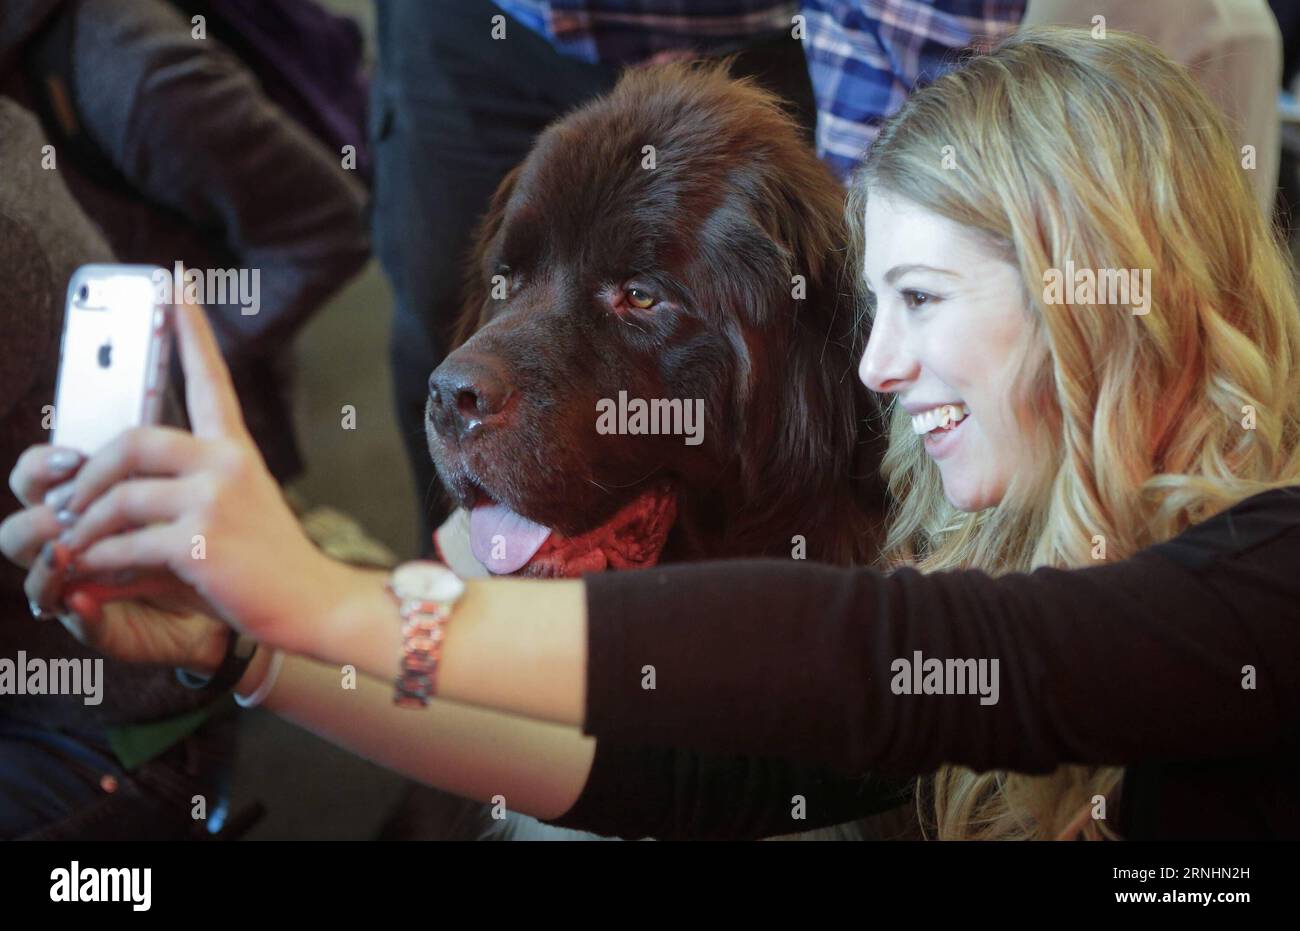 (161130) -- VANCOUVER, Nov. 30, 2016 -- A student takes a photo with a dog during the puppy therapy event at Simon Fraser University in Vancouver, Canada, Nov. 29, 2016. Simon Fraser University invited puppies to campus during exam time to help students take a break from the stress of end-of-term assignments. )(gj) CANADA-VANCOUVER-PUPPY THERAPY LiangxSen PUBLICATIONxNOTxINxCHN   Vancouver Nov 30 2016 a Student Takes a Photo With a Dog during The Puppy THERAPY Event AT Simon Fraser University in Vancouver Canada Nov 29 2016 Simon Fraser University invited Puppies to Campus during Exam Time to Stock Photo